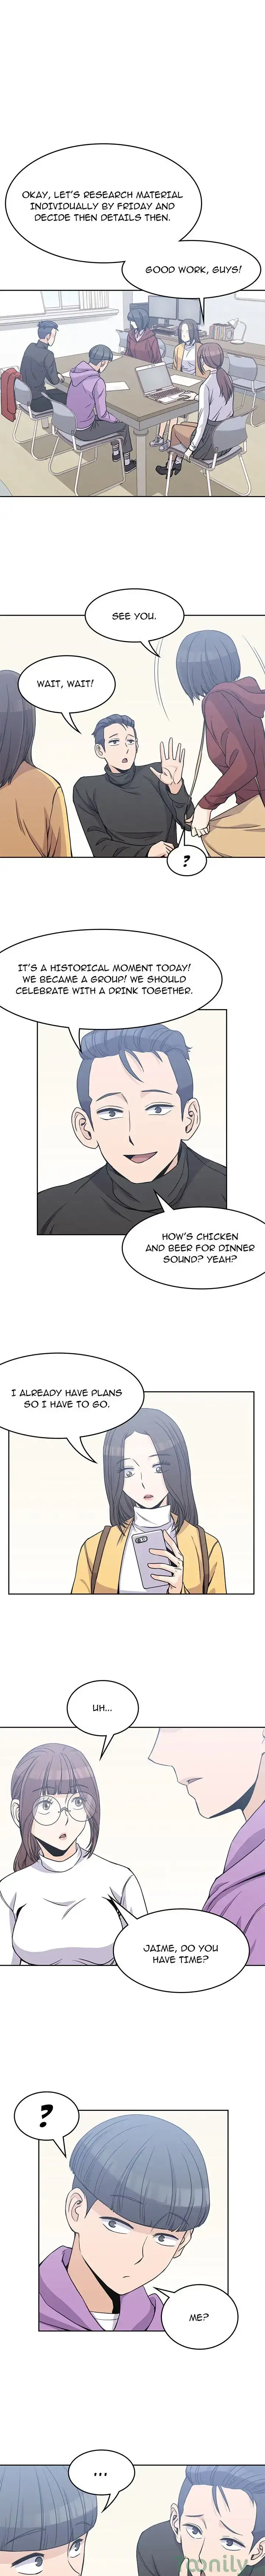 Boys are Boys - Chapter 4 Page 8